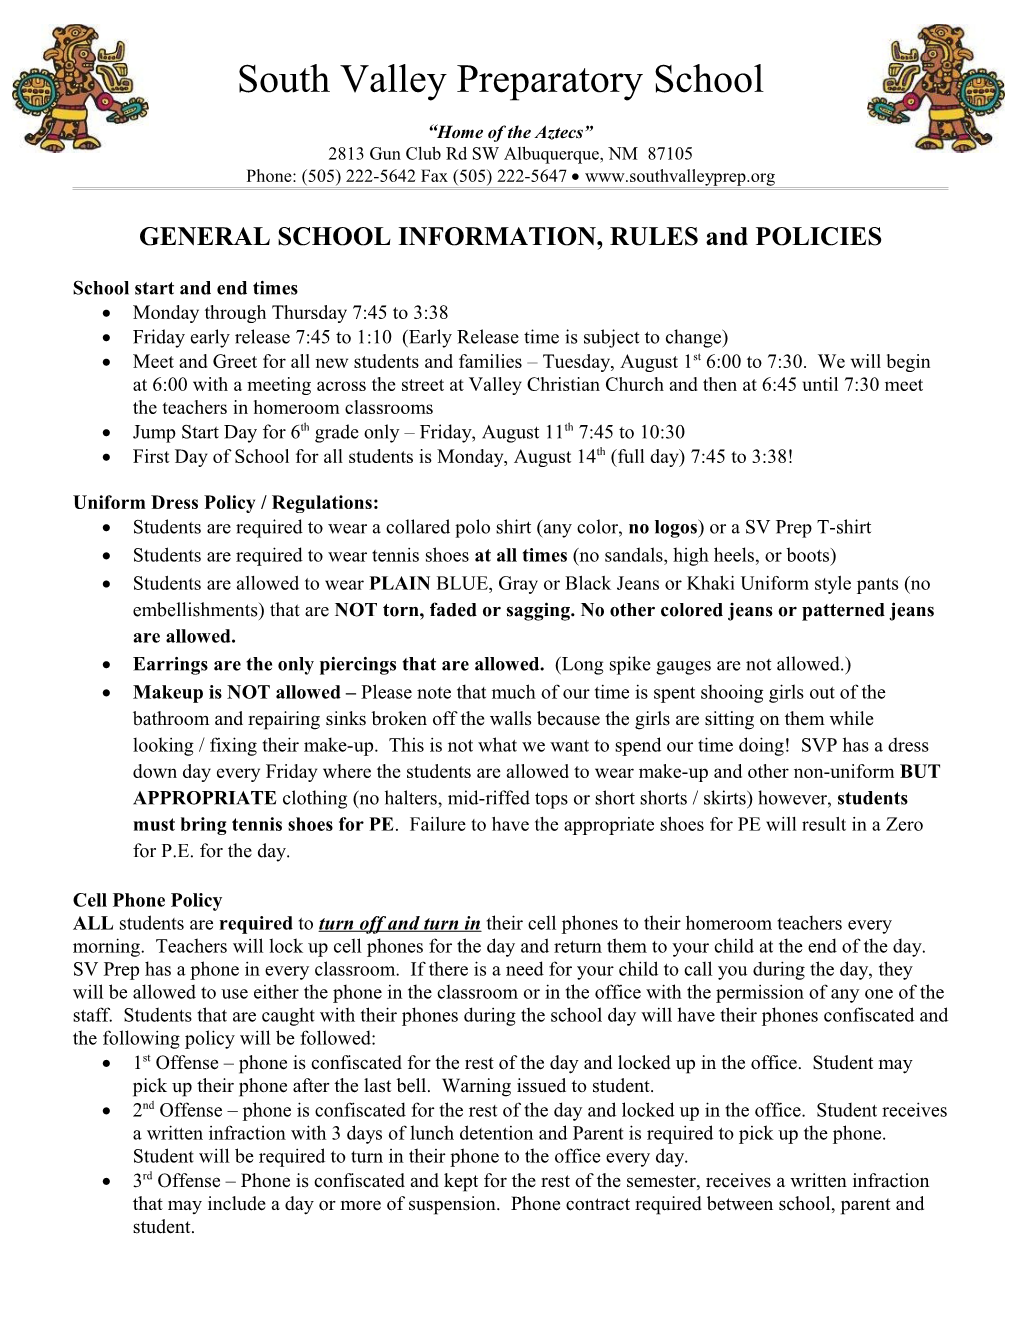 GENERAL SCHOOL INFORMATION, RULES and POLICIES